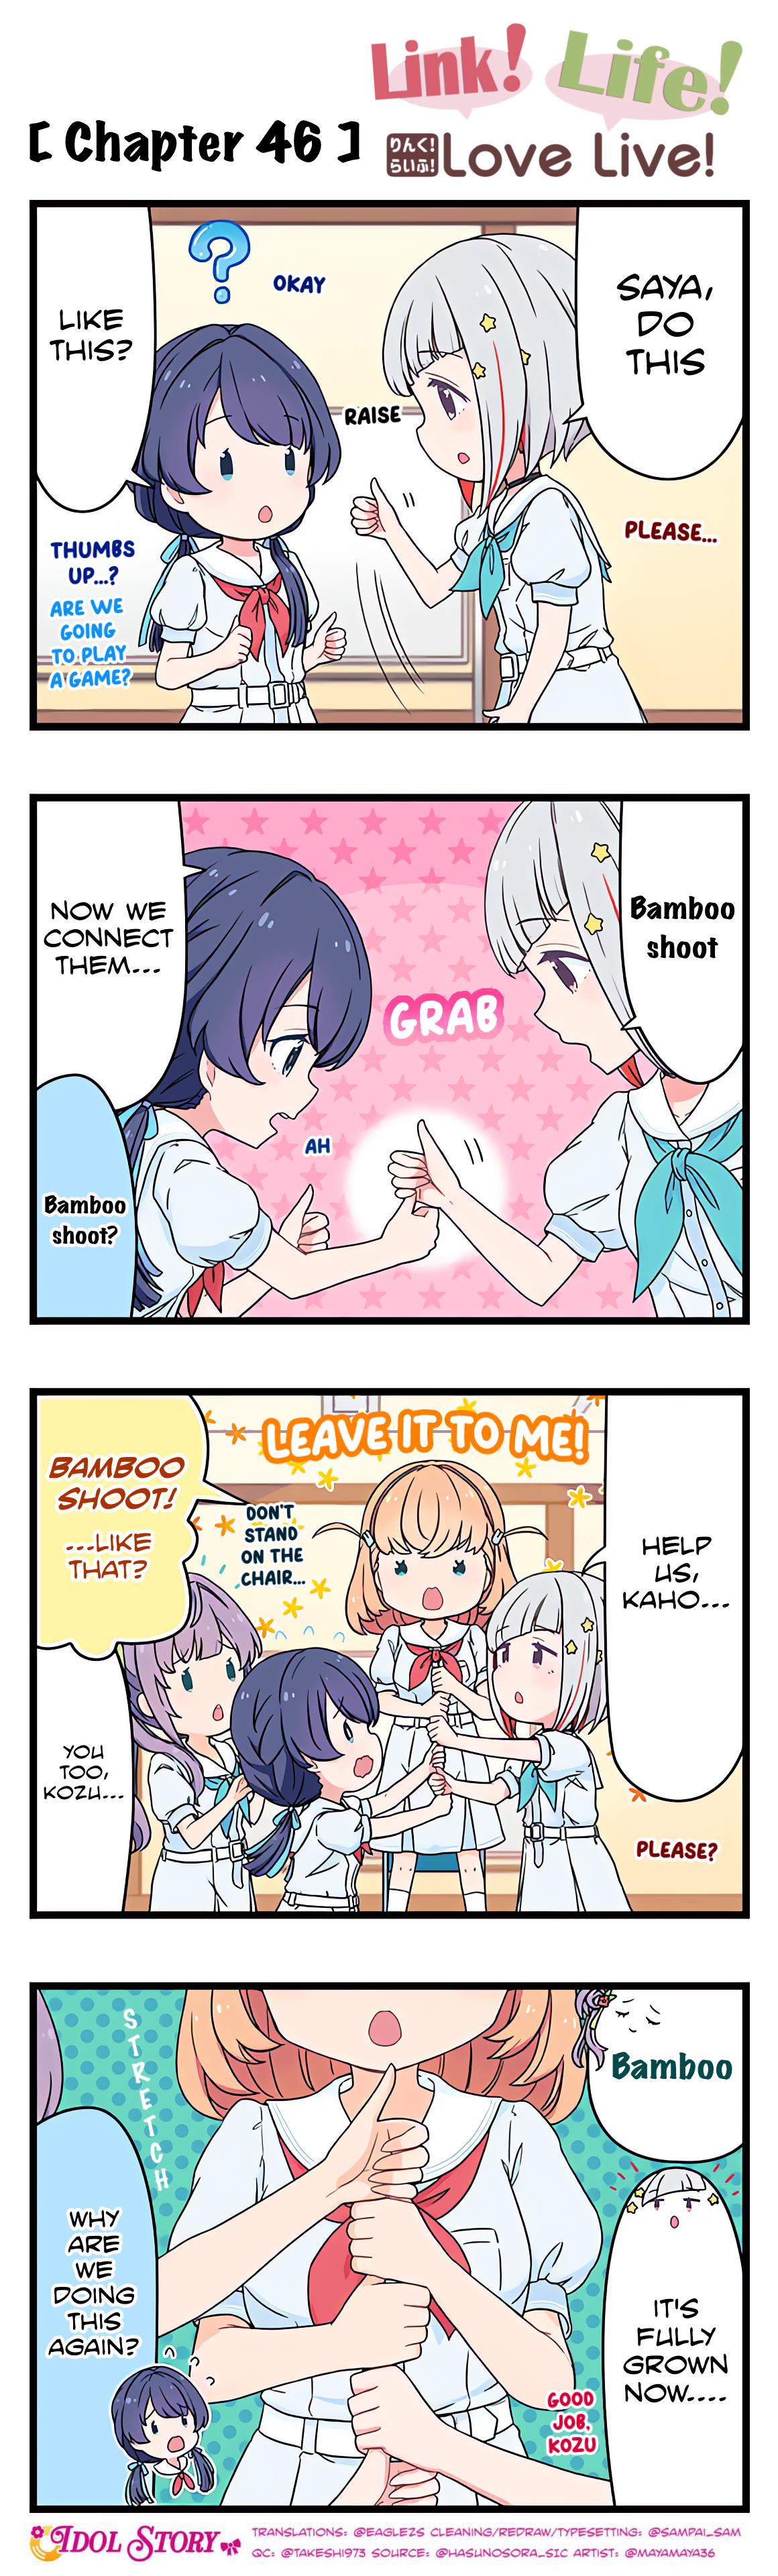 Link! Life! Love Live! Chapter 46 #1